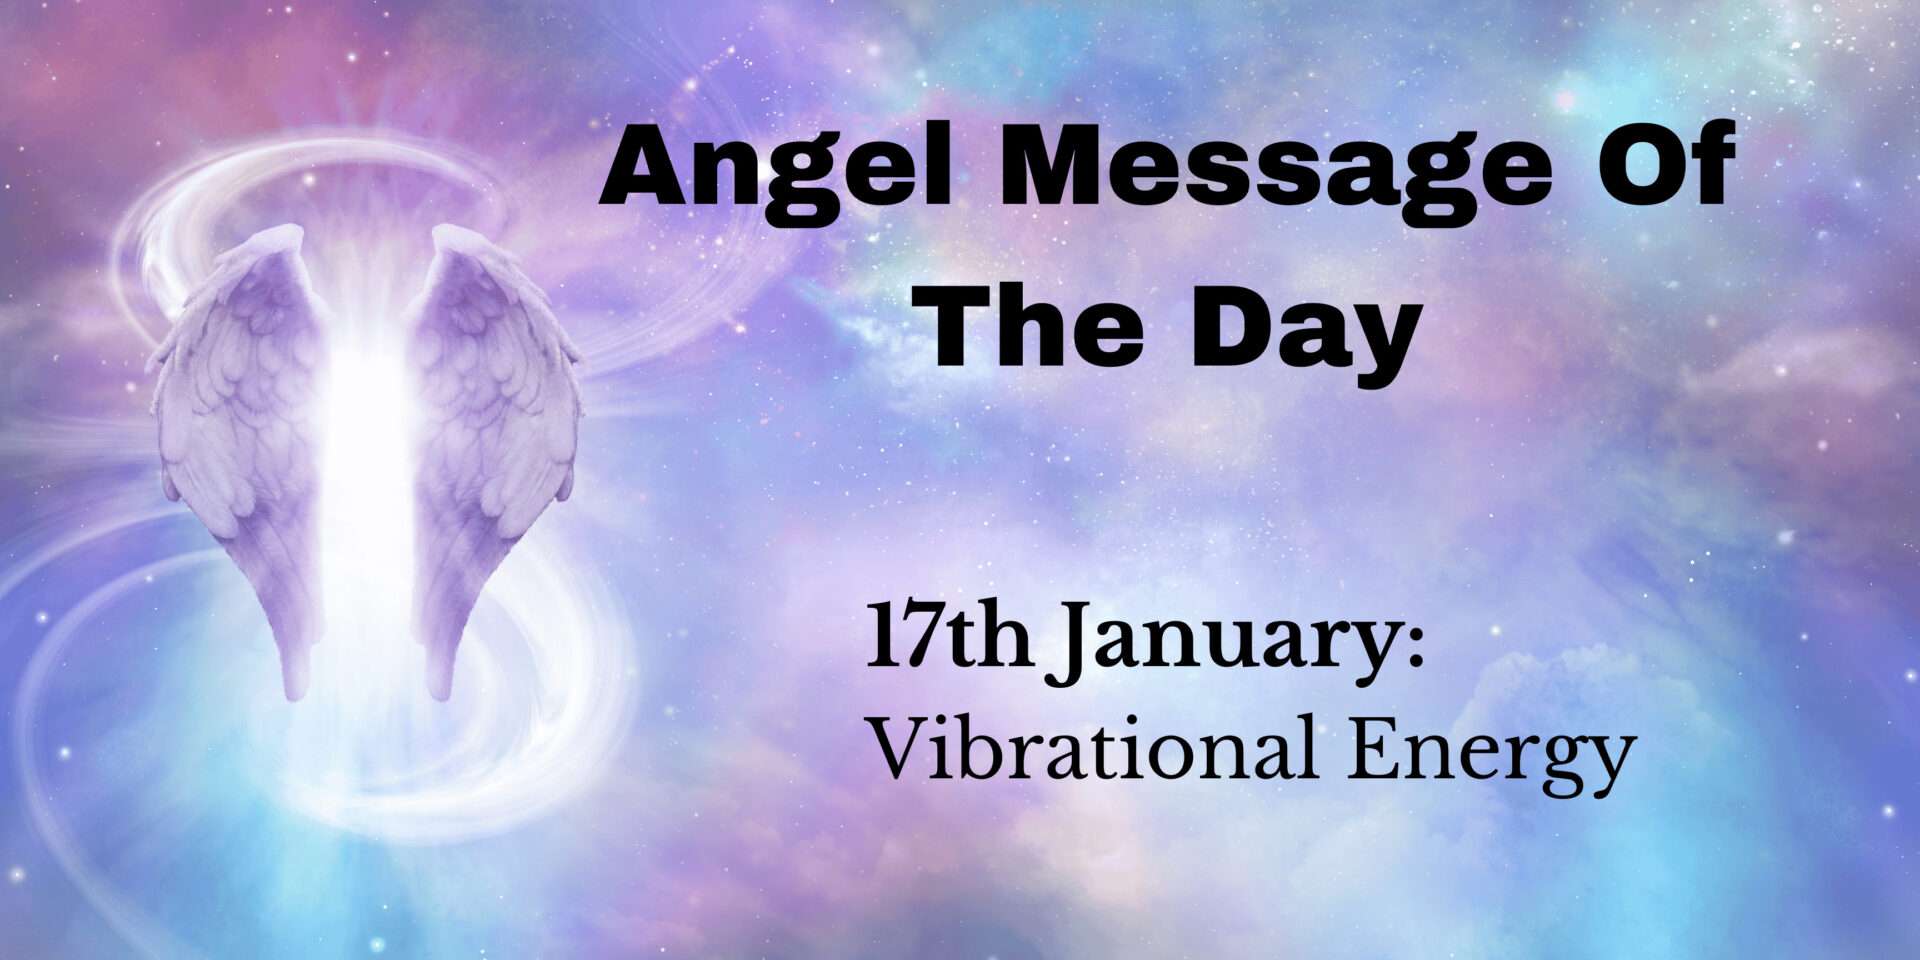 angel message of the day : vibrational energy